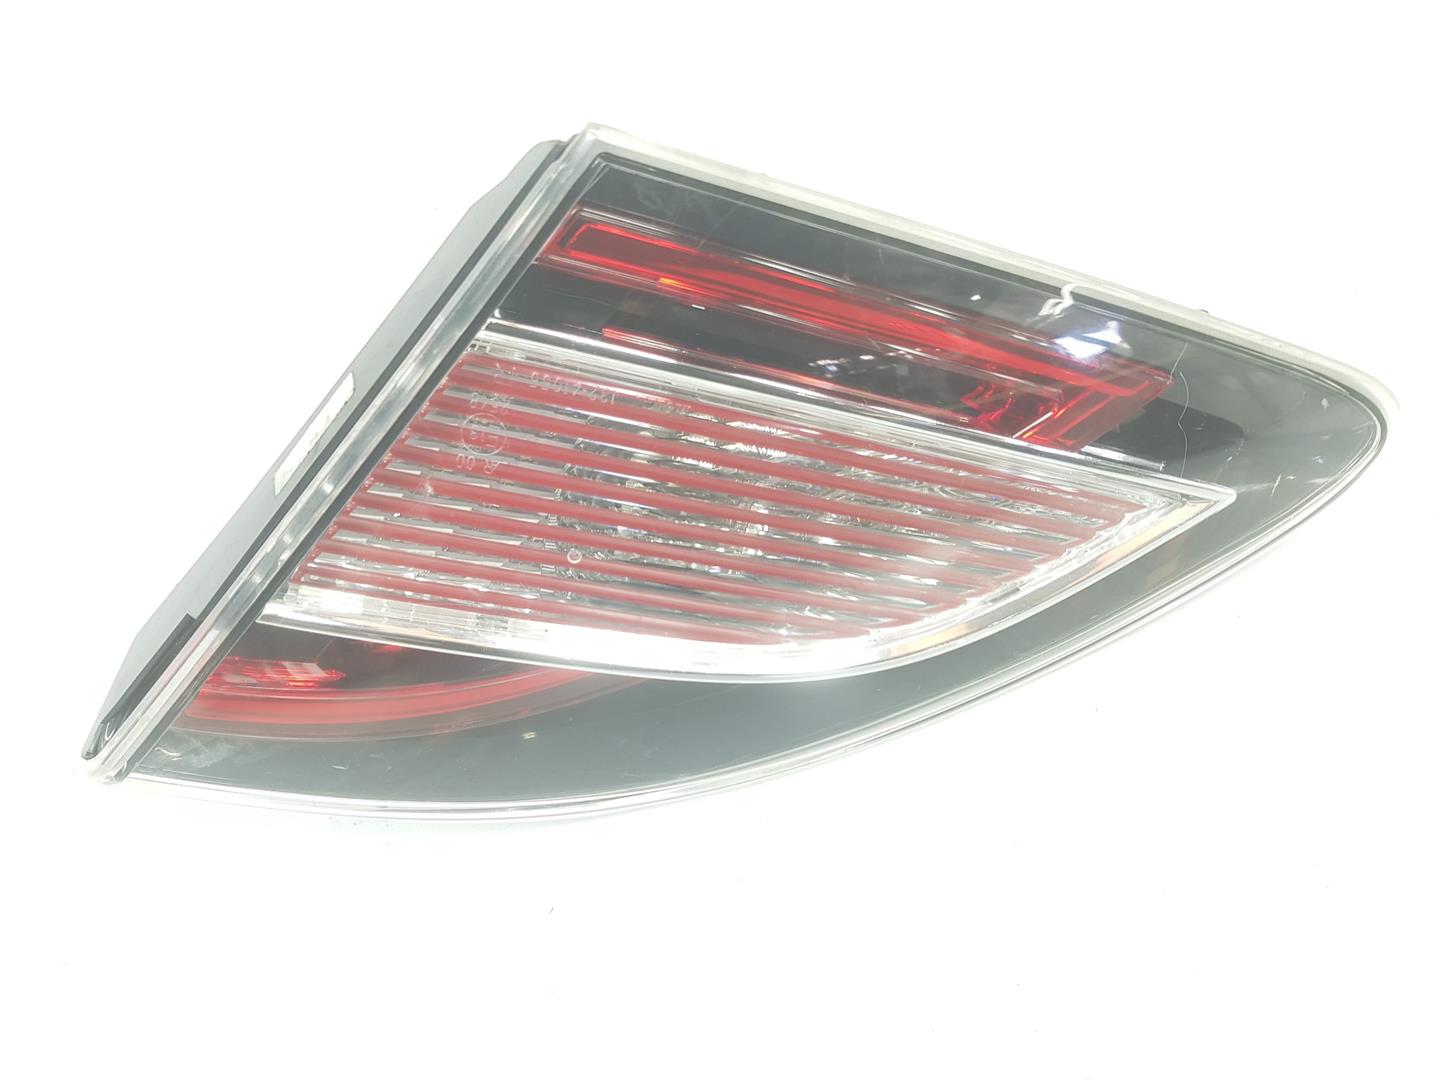 MAZDA 6 GH (2007-2013) Rear Right Taillight Lamp GS1F513H0H, GS1F513H0H 24153048